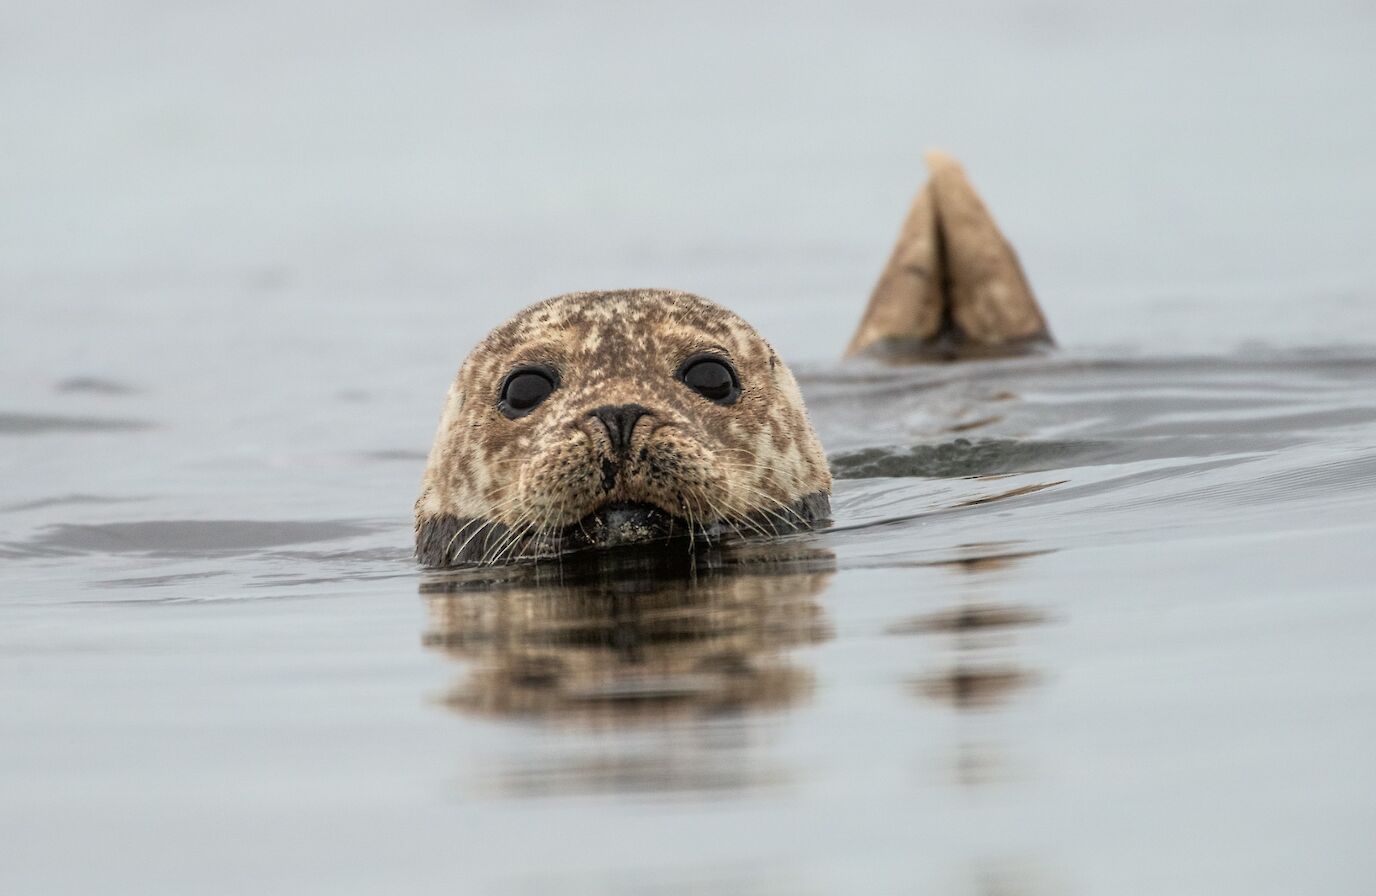 Harbour seal in Orkney - image by Raymond Besant